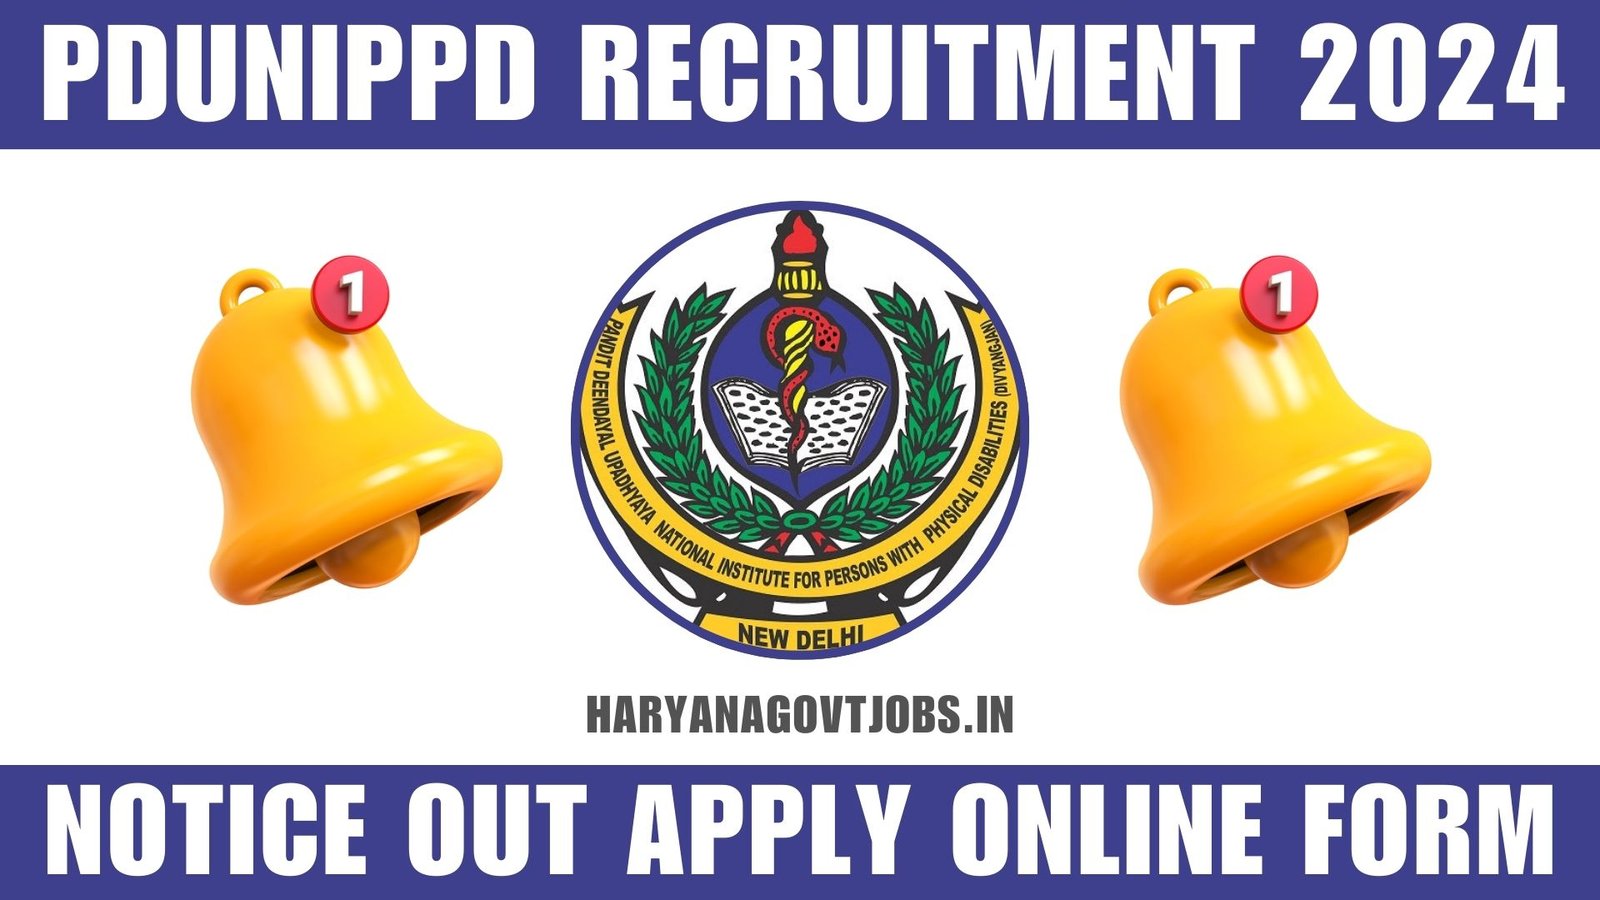 PDUNIPPD Recruitment 2024 Notice Out Apply Online Form